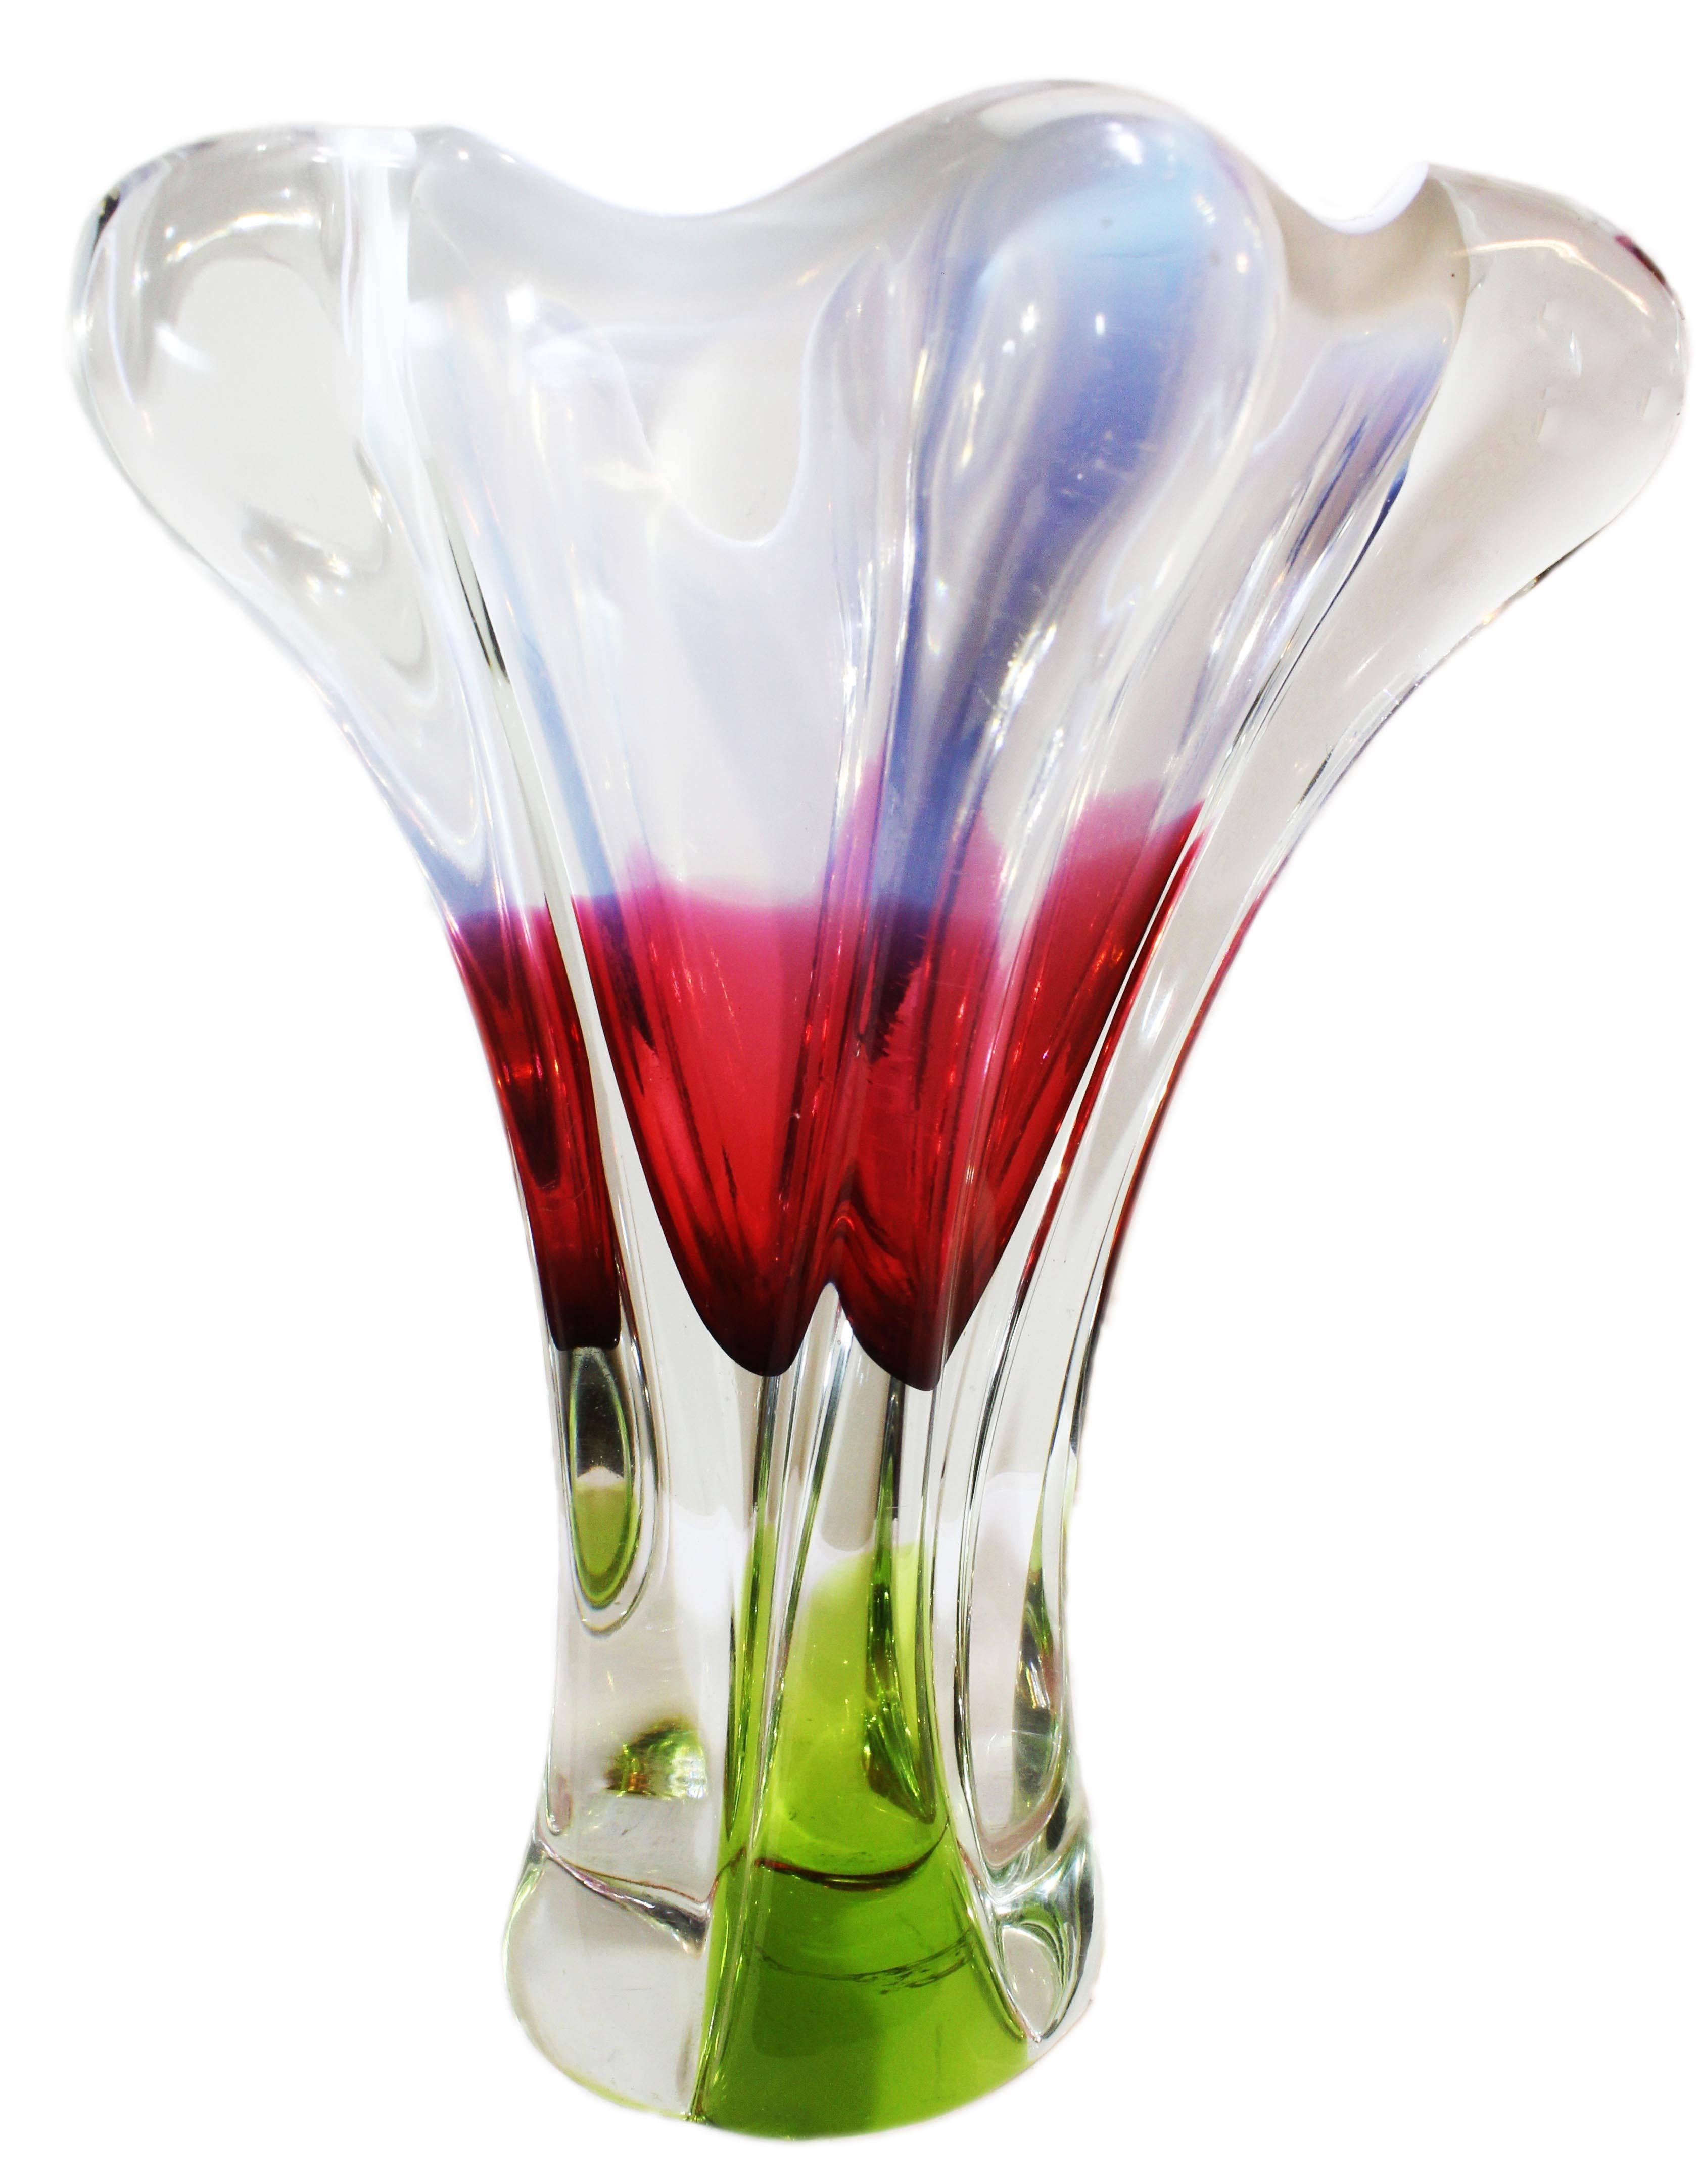 A vintage Czechoslovakian art glass vase by Chribska, designed by Josef Hospodka and dating to around the 1950s-1960s.

The vase is of four lobed form and is in a light green through cranberry glass encased in clear glass, with a white opalescent